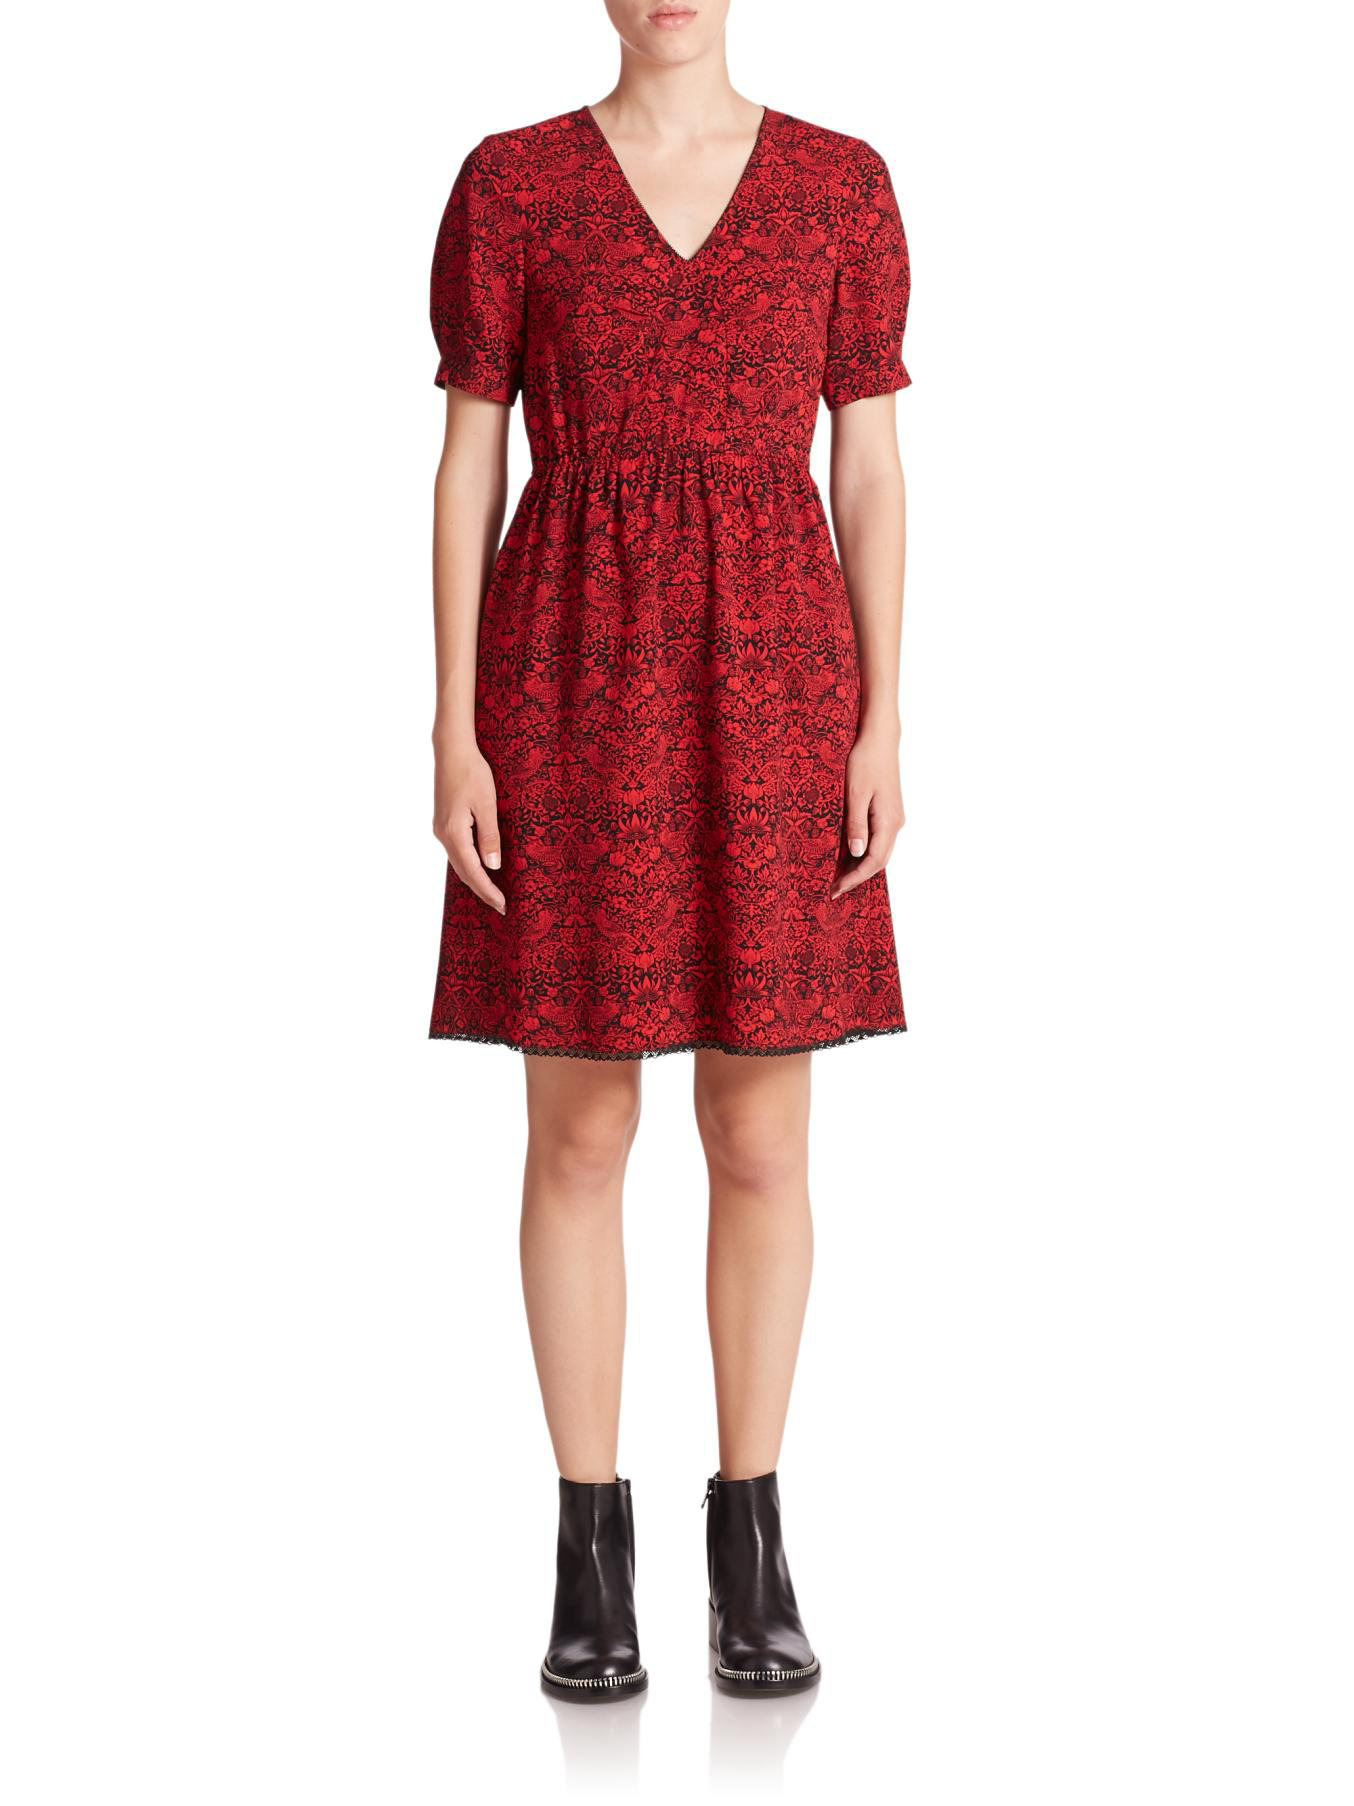 Lyst - Marc by marc jacobs Strawberry Thief Crepe Slip Dress in Red